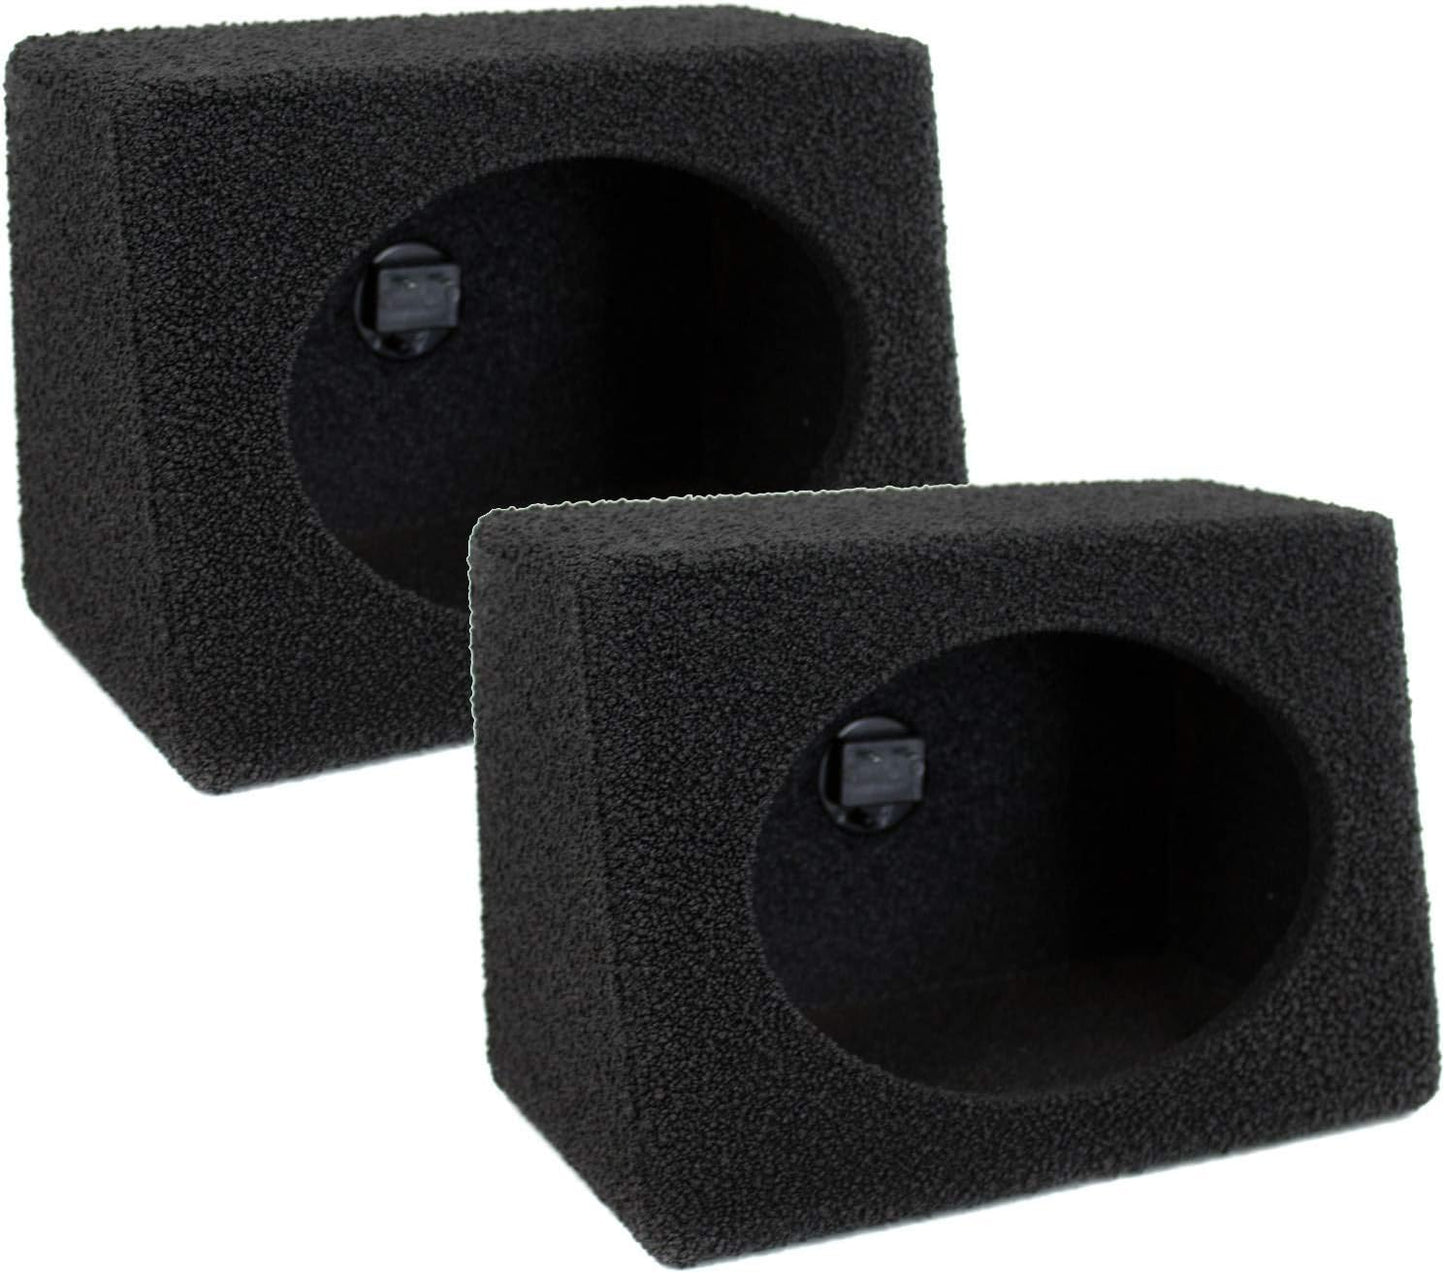 Q Power QBTW6X9 Single 6 x 9 Inches Speaker Boxes with Durable Bed Liner Spray